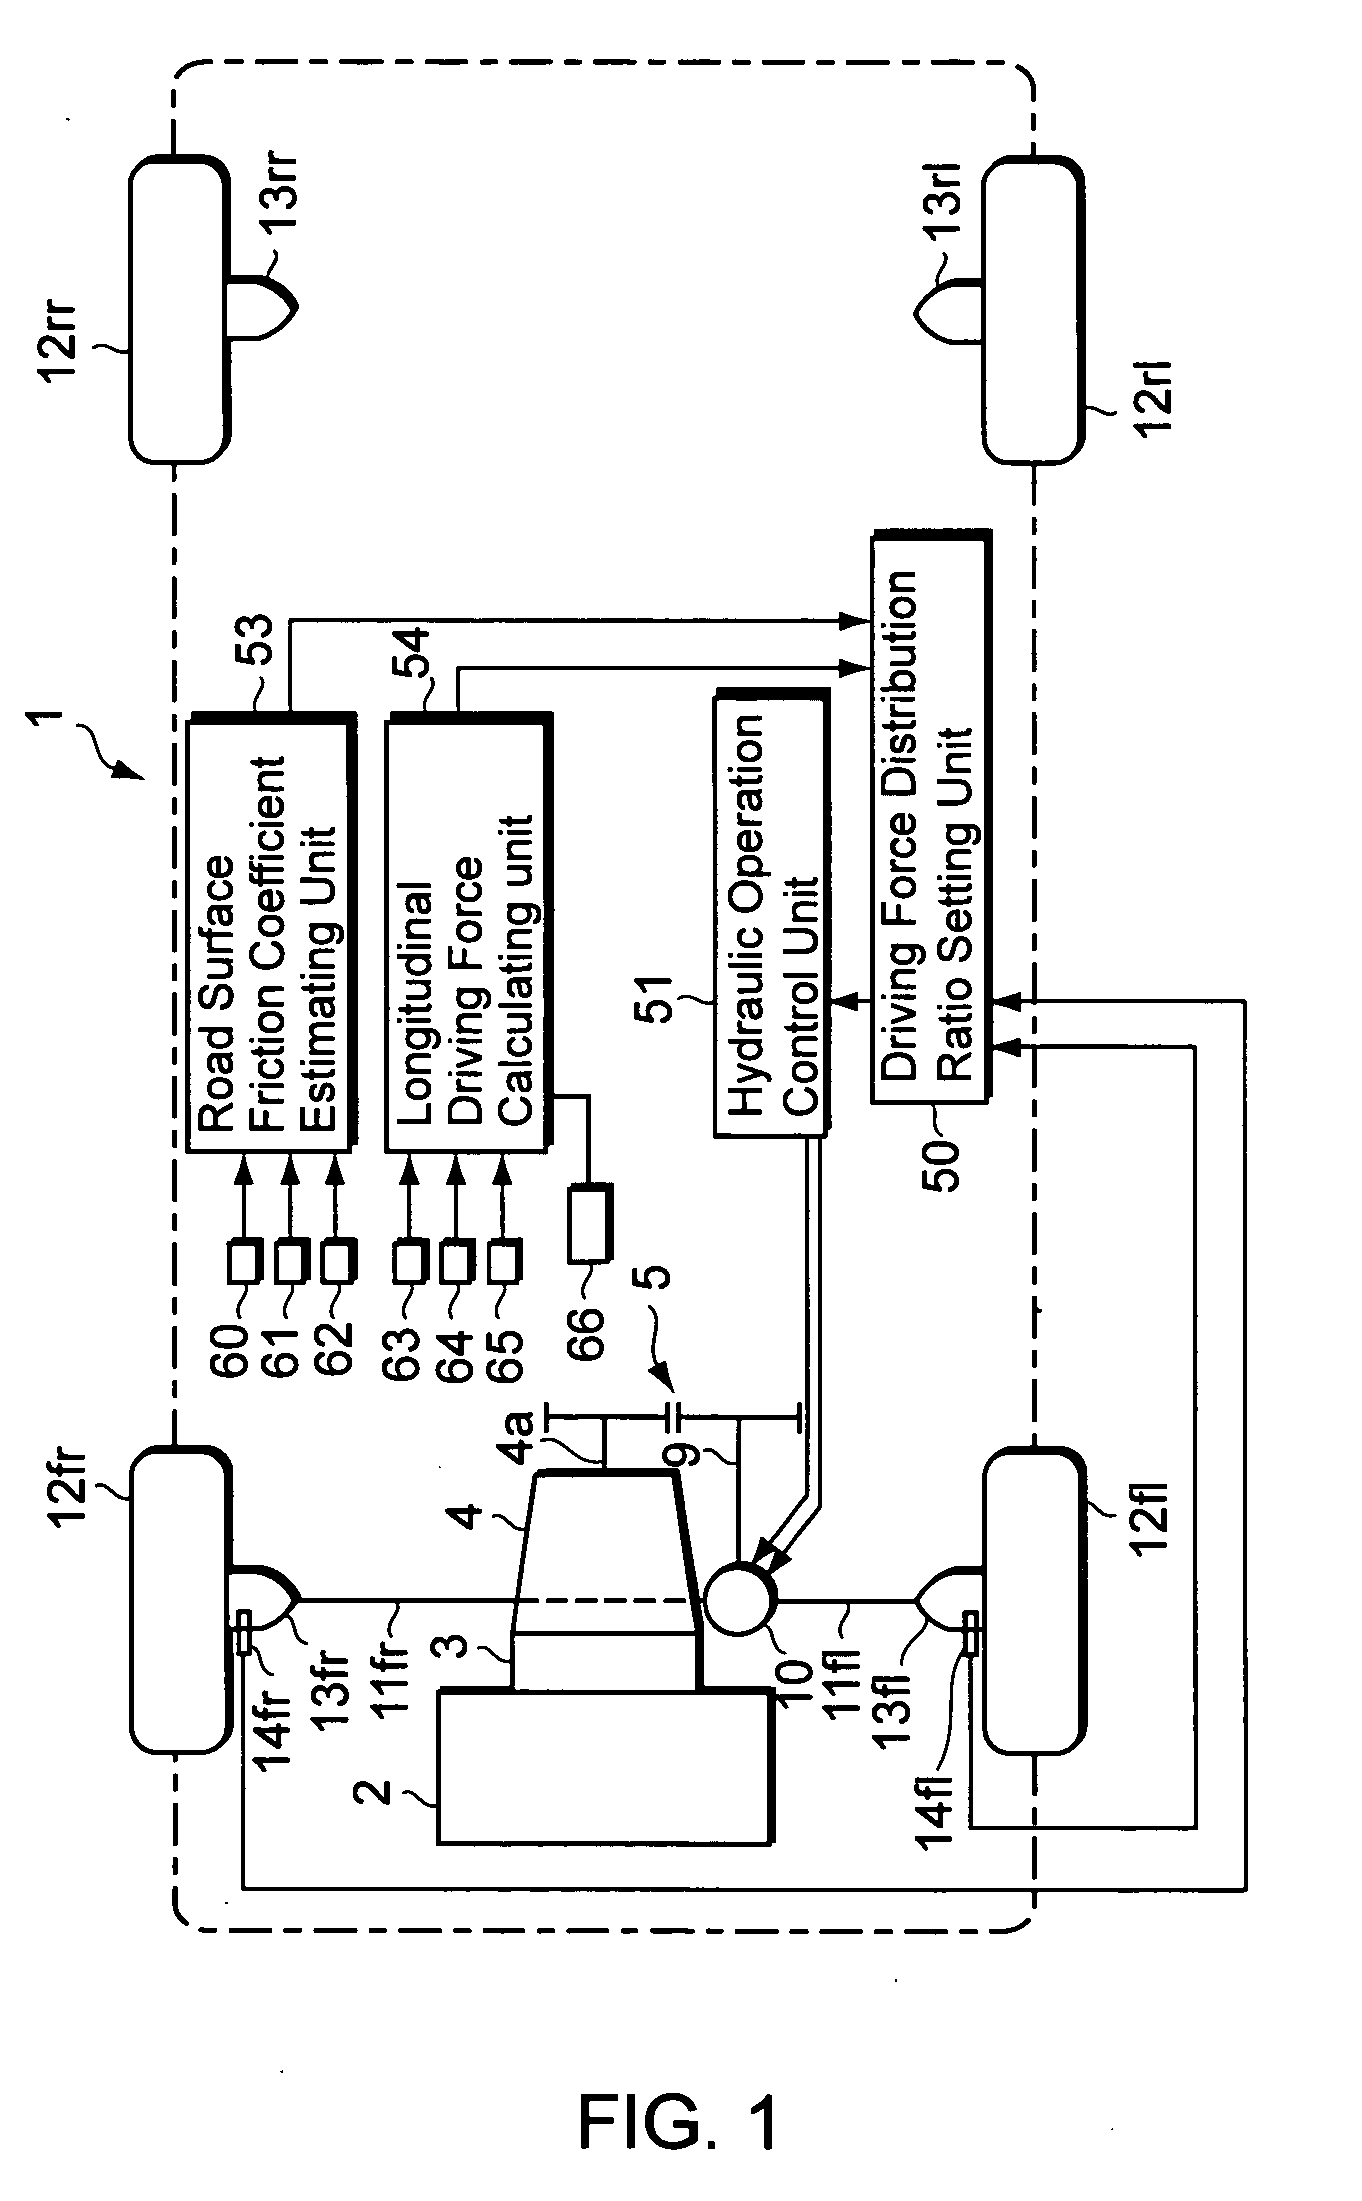 Vehicle motion control device and method